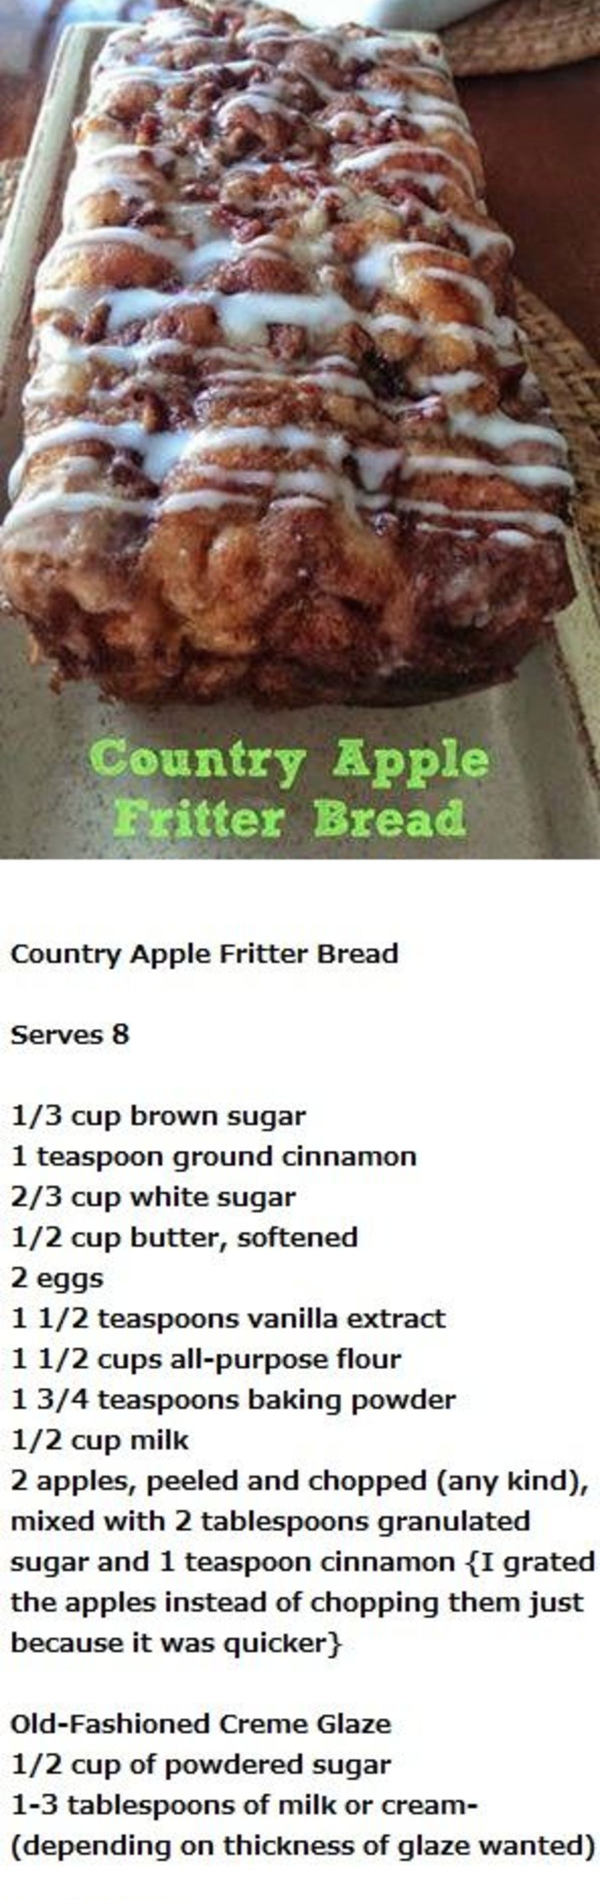 UNIQUE non-traditional Thanksgiving or Christmas dessert idea - this apple bread is OUTSTANDING and so delicious!  Also makes a great homemade gift or hostess gift and is GREAT when you have company to have out to snack on.